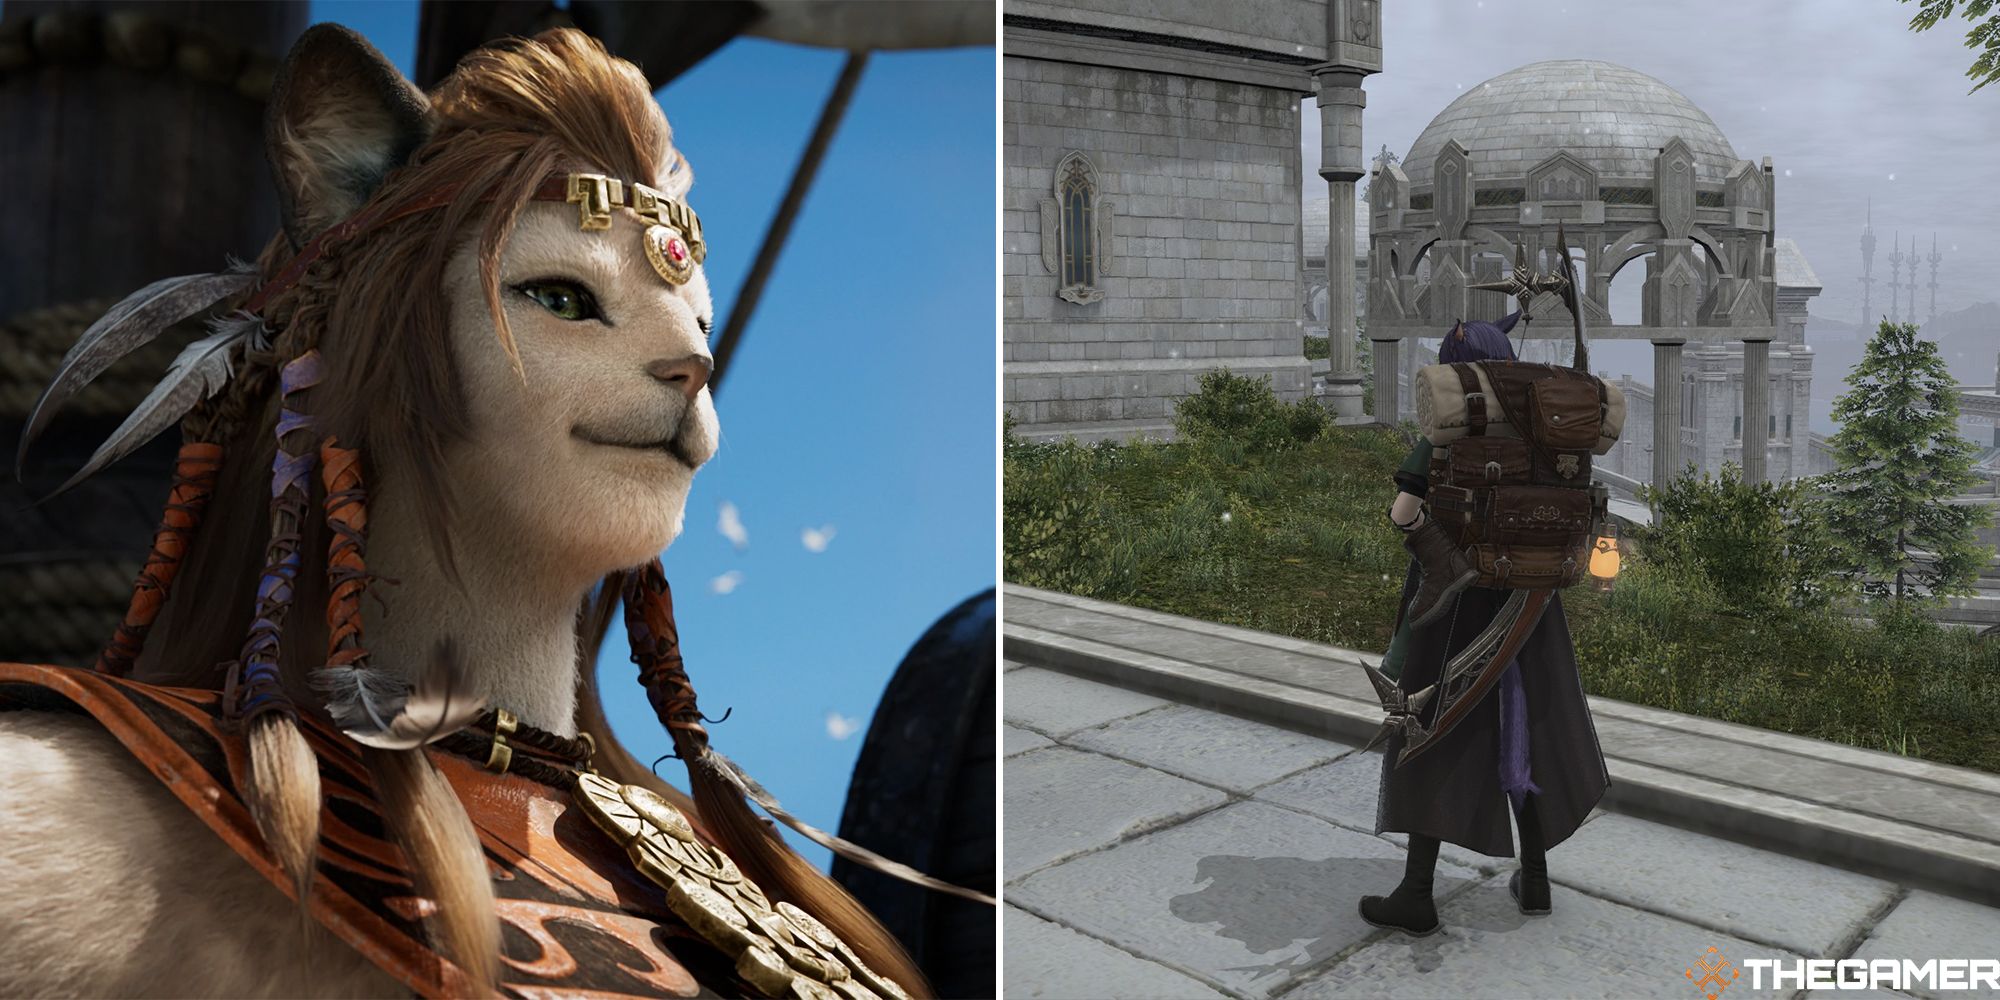 wuk lamat female hrothgar in the dawntrail trailer and character with the knapsack backpack fashion accessory split